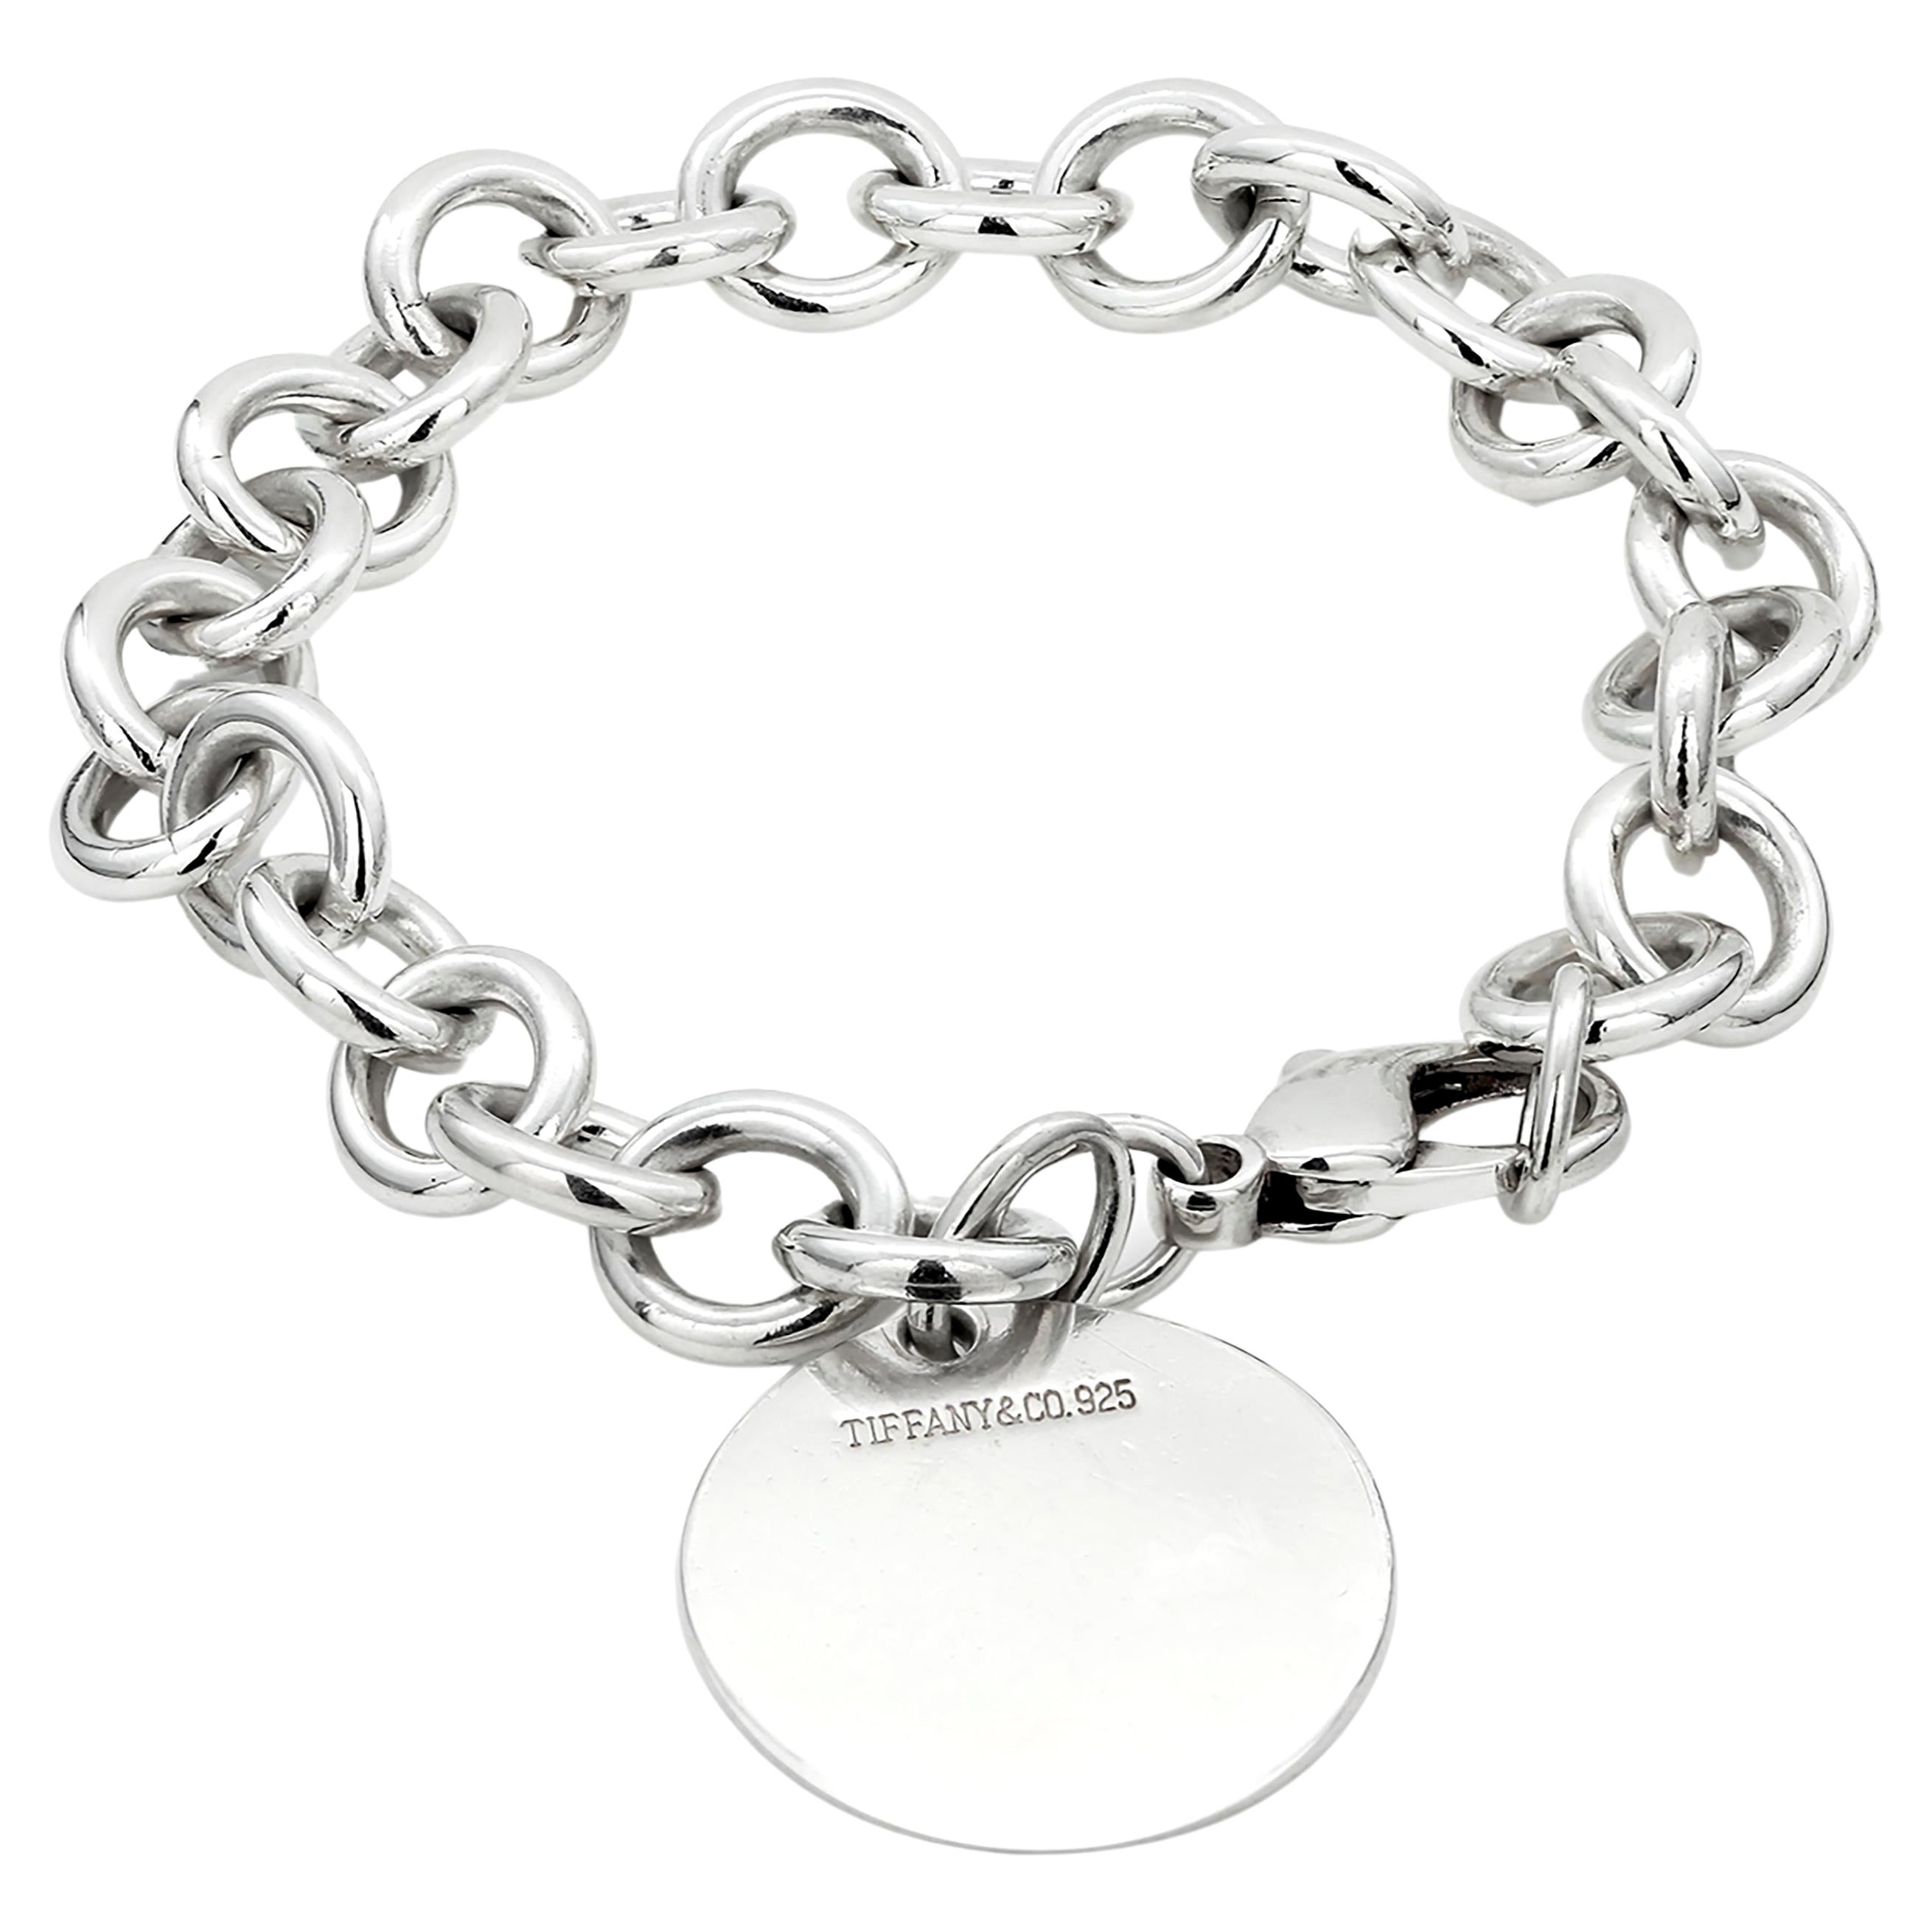 Tiffany and Co. Sterling Silver Link Bracelet with Monogrammed Charm